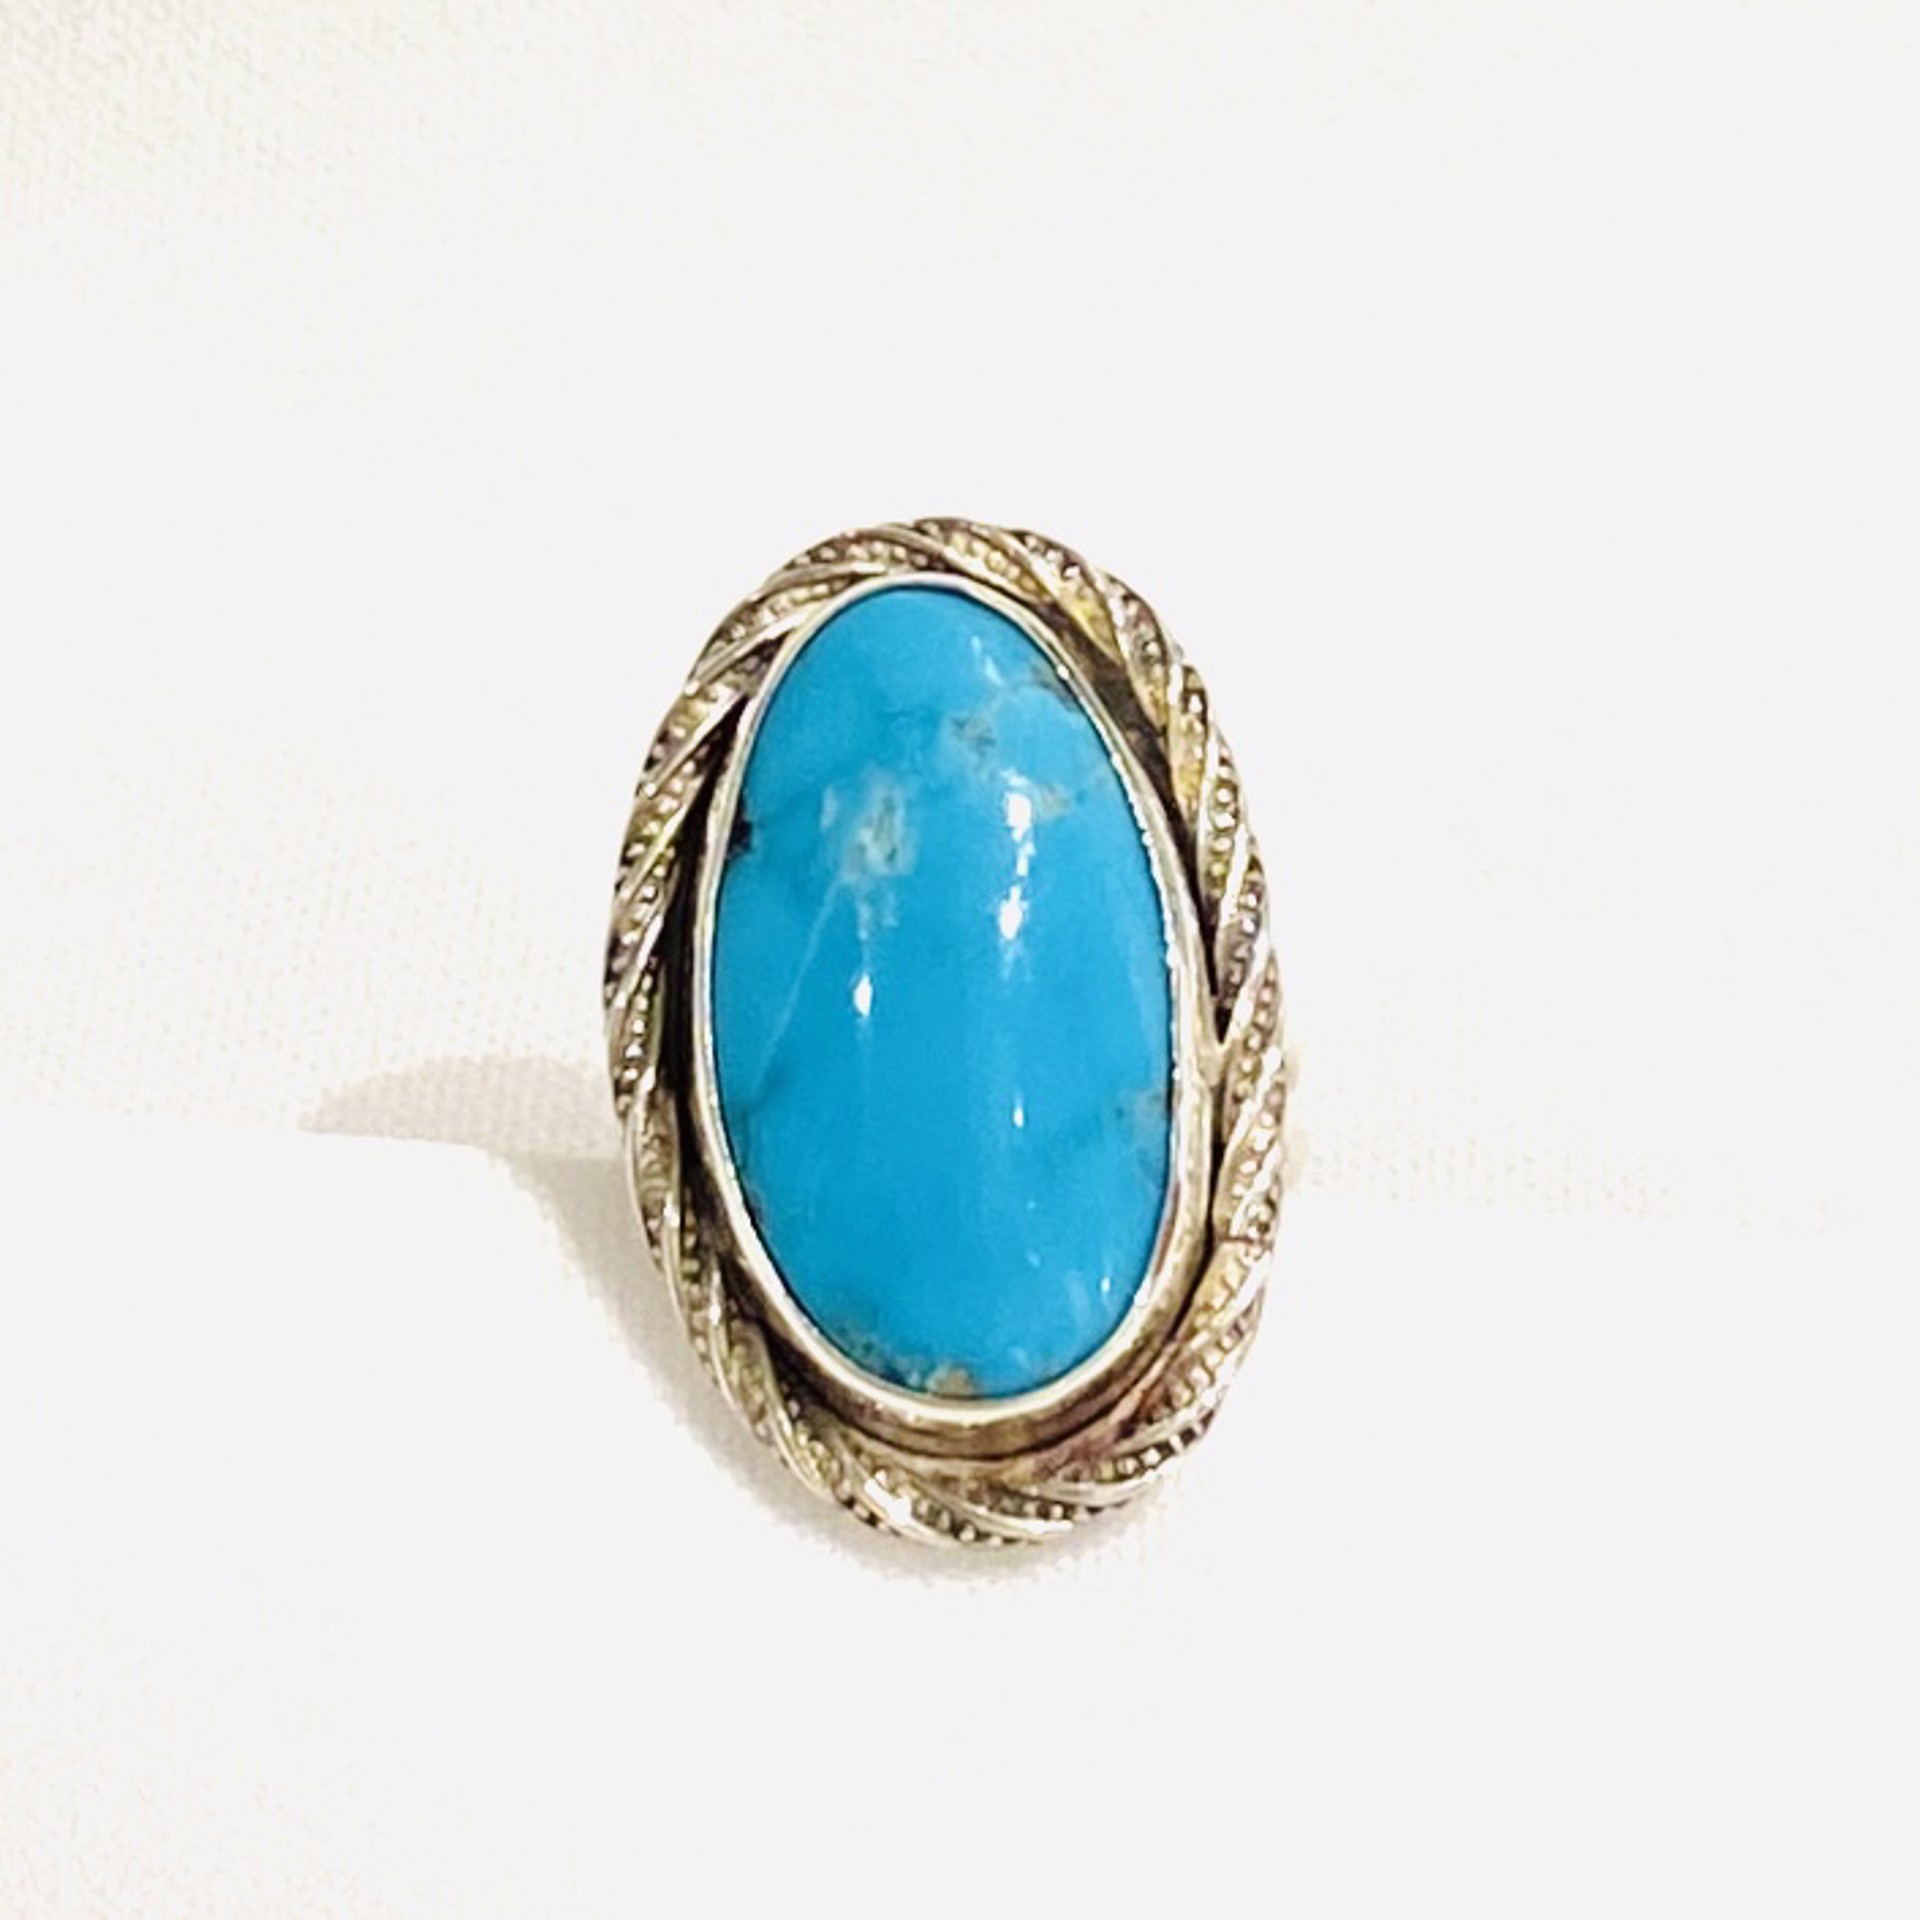 Large Oval Morenci Turquoise Ring sz8 AB22-35 by Anne Bivens